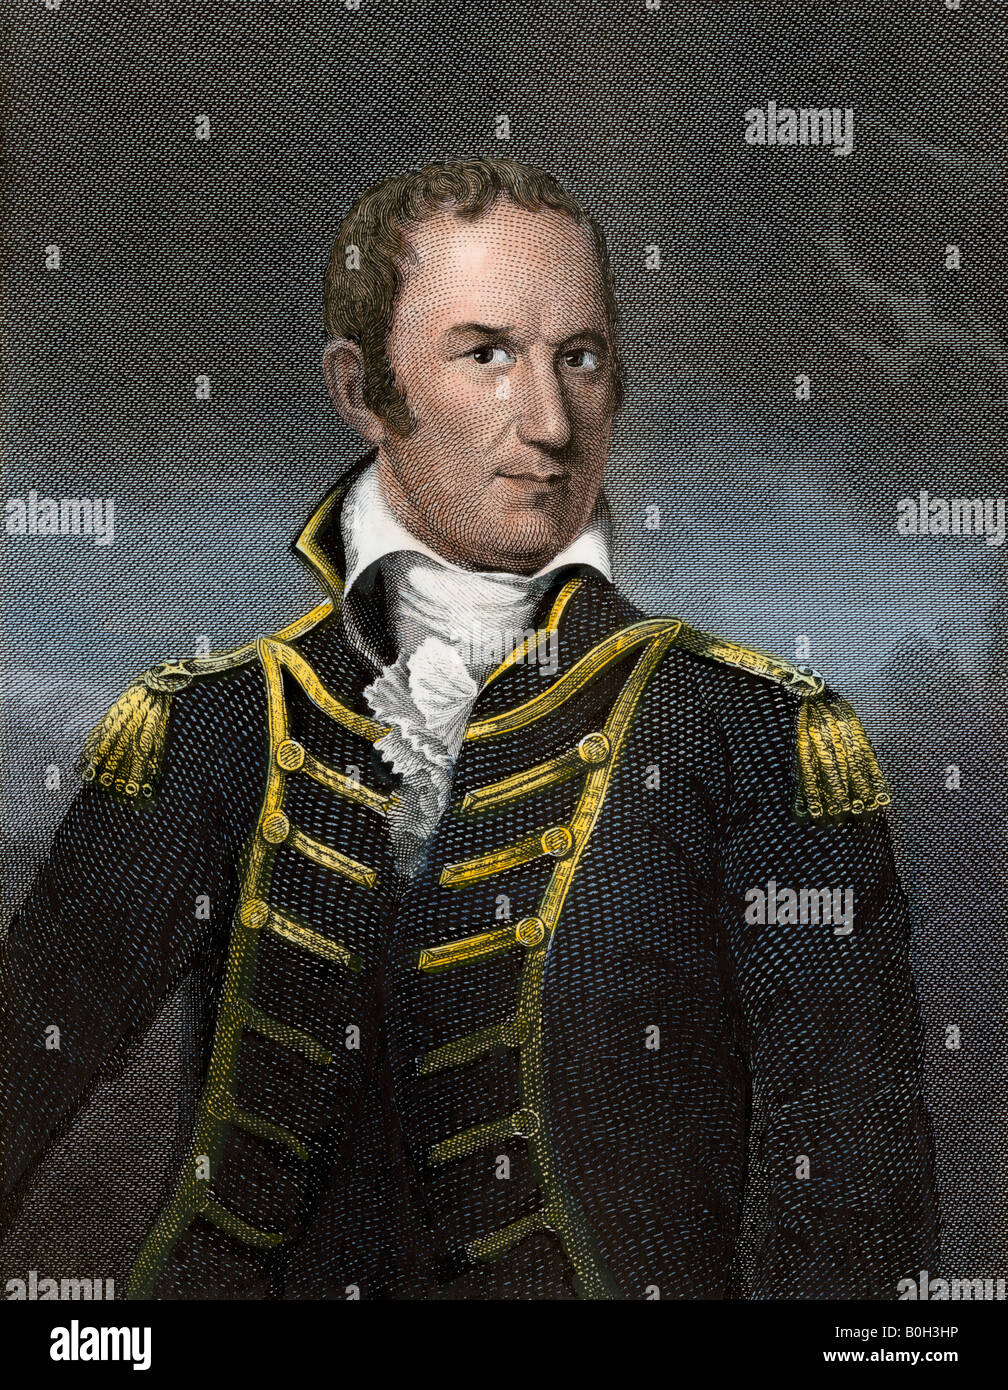 Commander Edward Preble US Navy officer. Hand-colored steel engraving Stock Photo